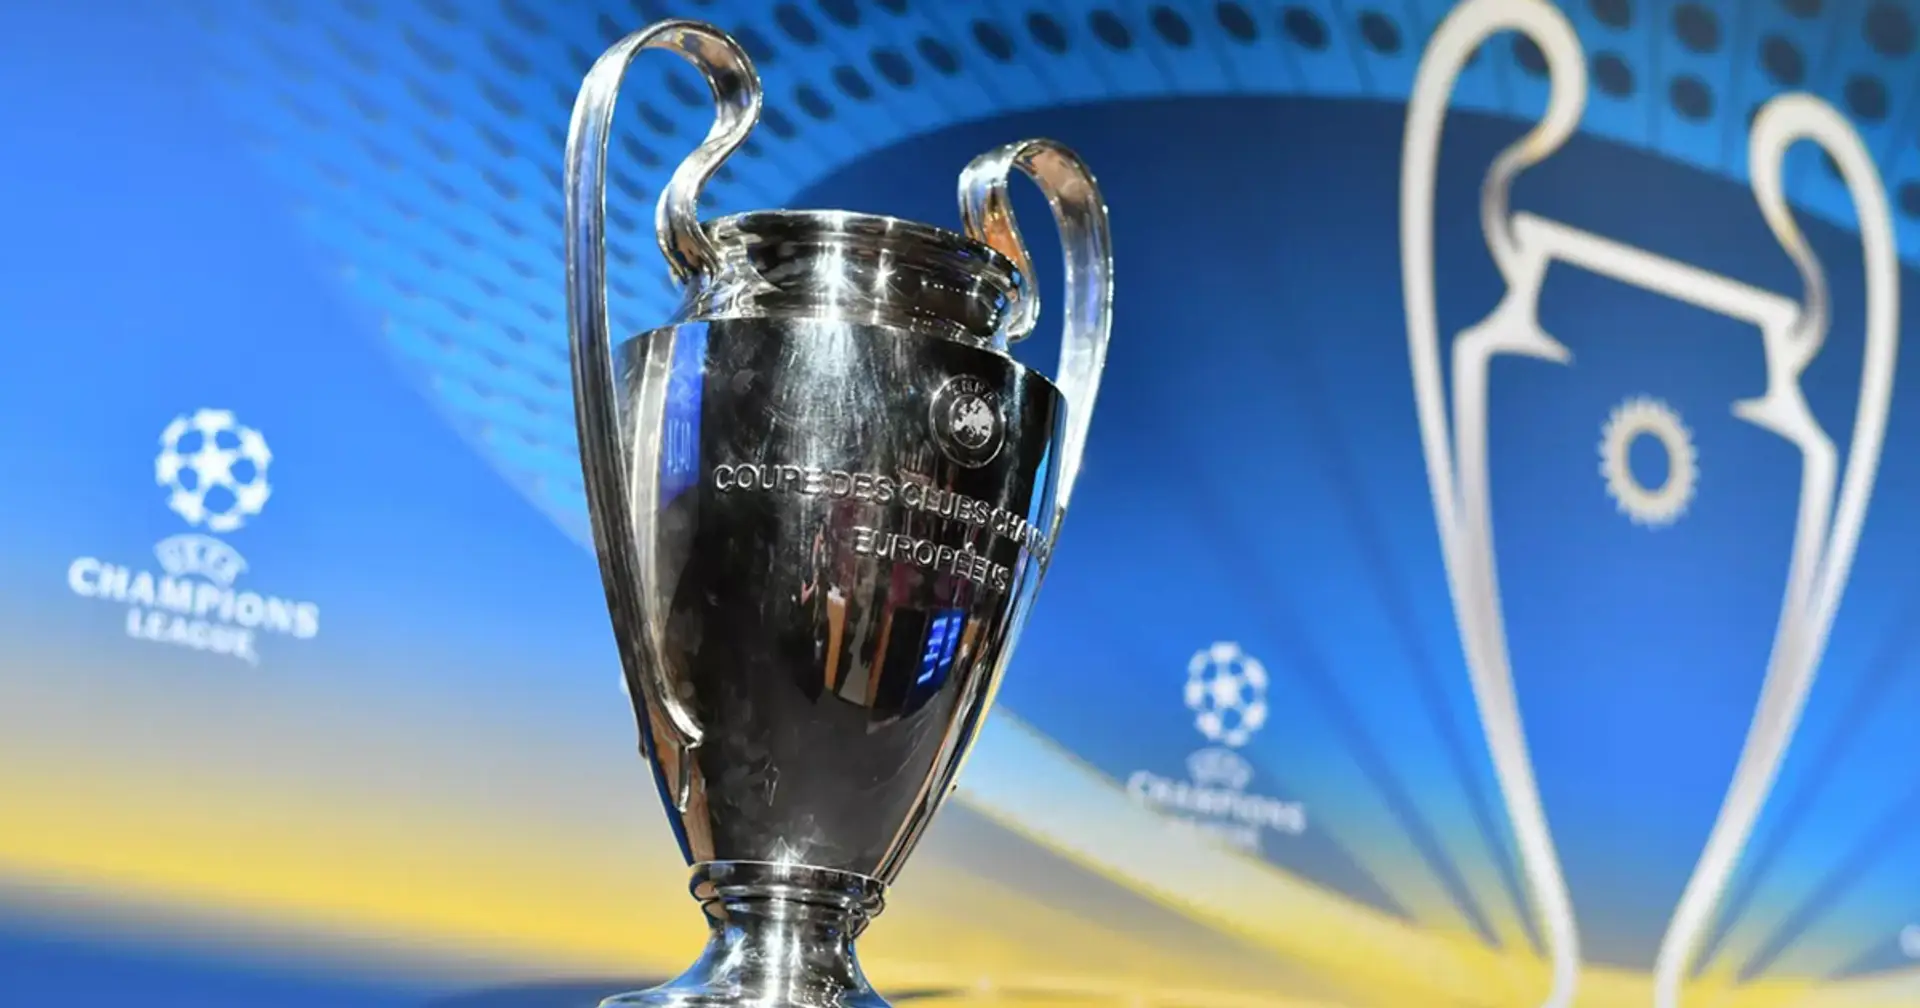 Dates for Champions League group-stage fixtures confirmed: Liverpool to start at Ajax on October 21